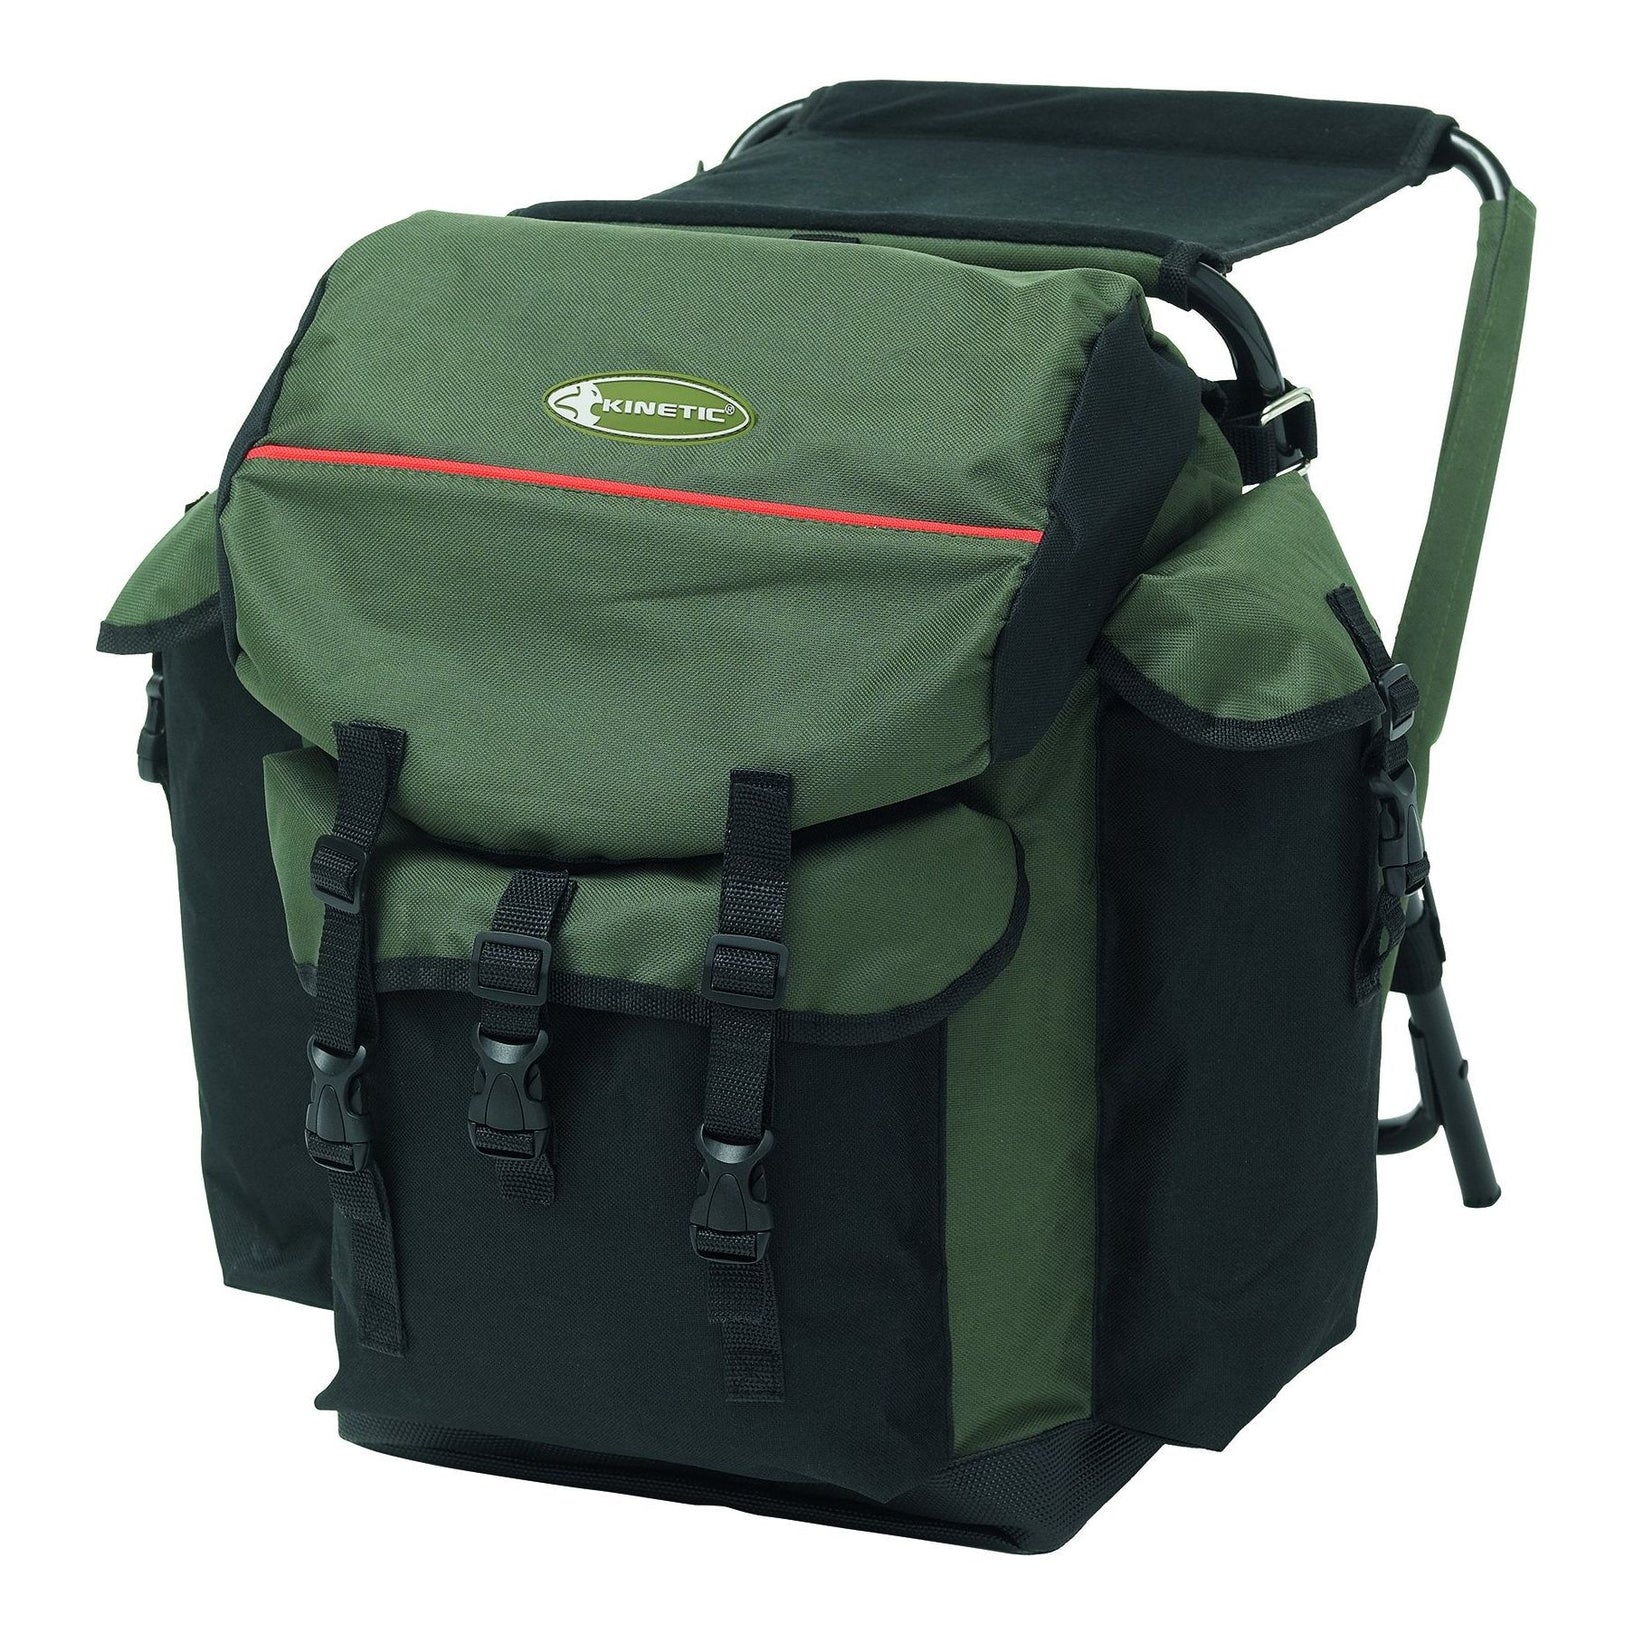 G108-093-014 KINETIC CHAIRPACK STD. 25L MOSS GREEN AT TED JOHNSONS PROBLEM SOLVED